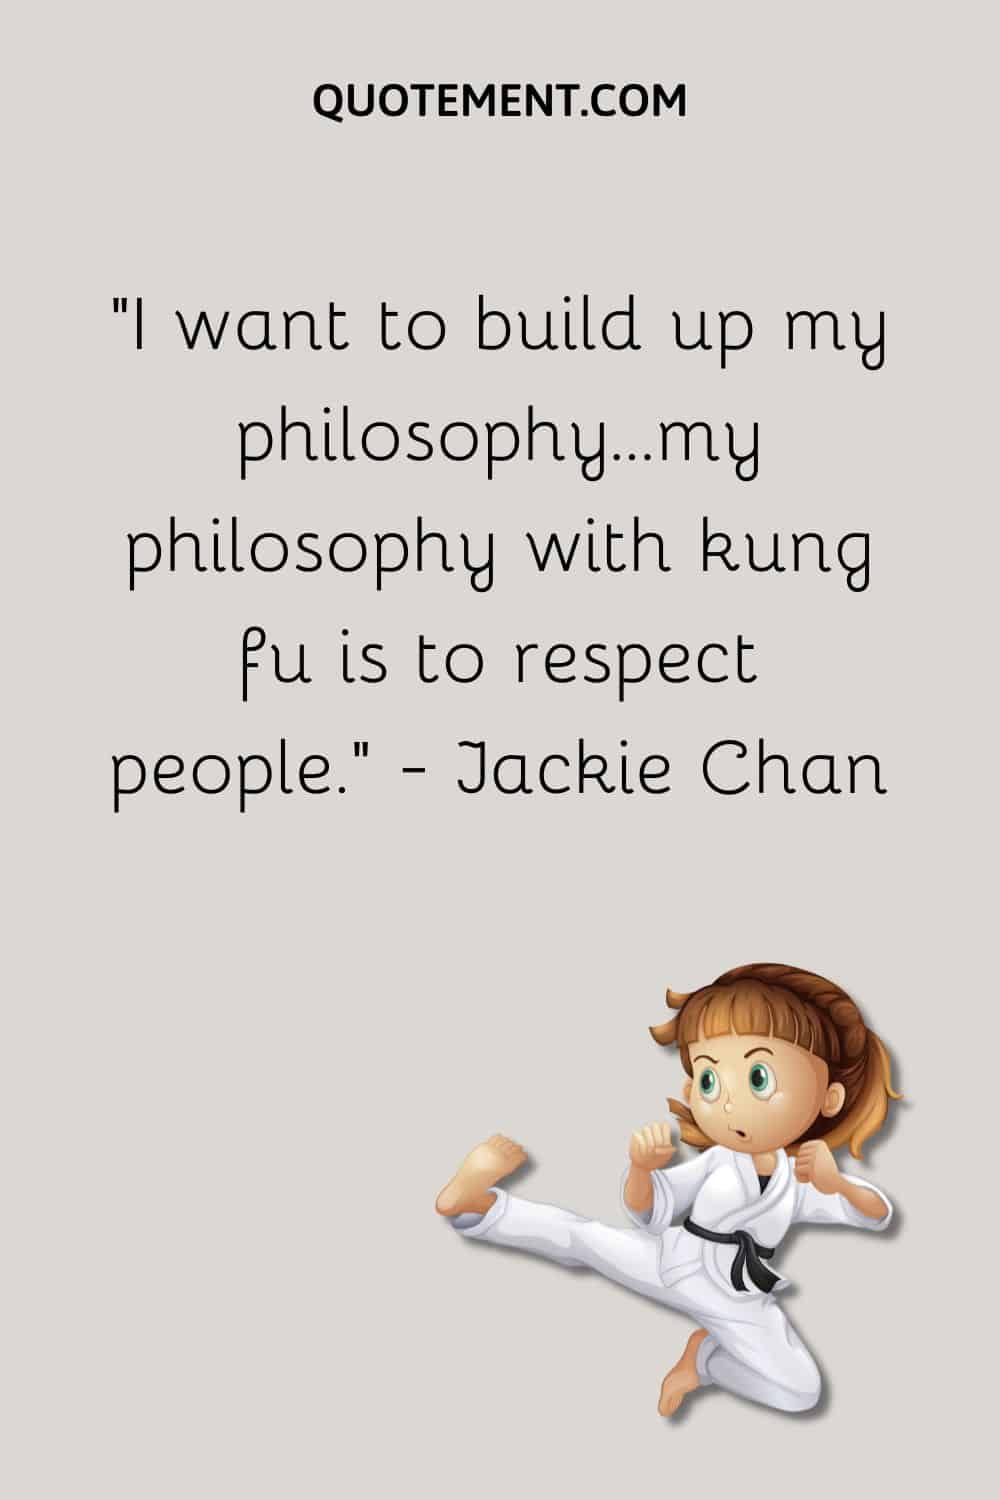 I want to build up my philosophy...my philosophy with kung fu is to respect people